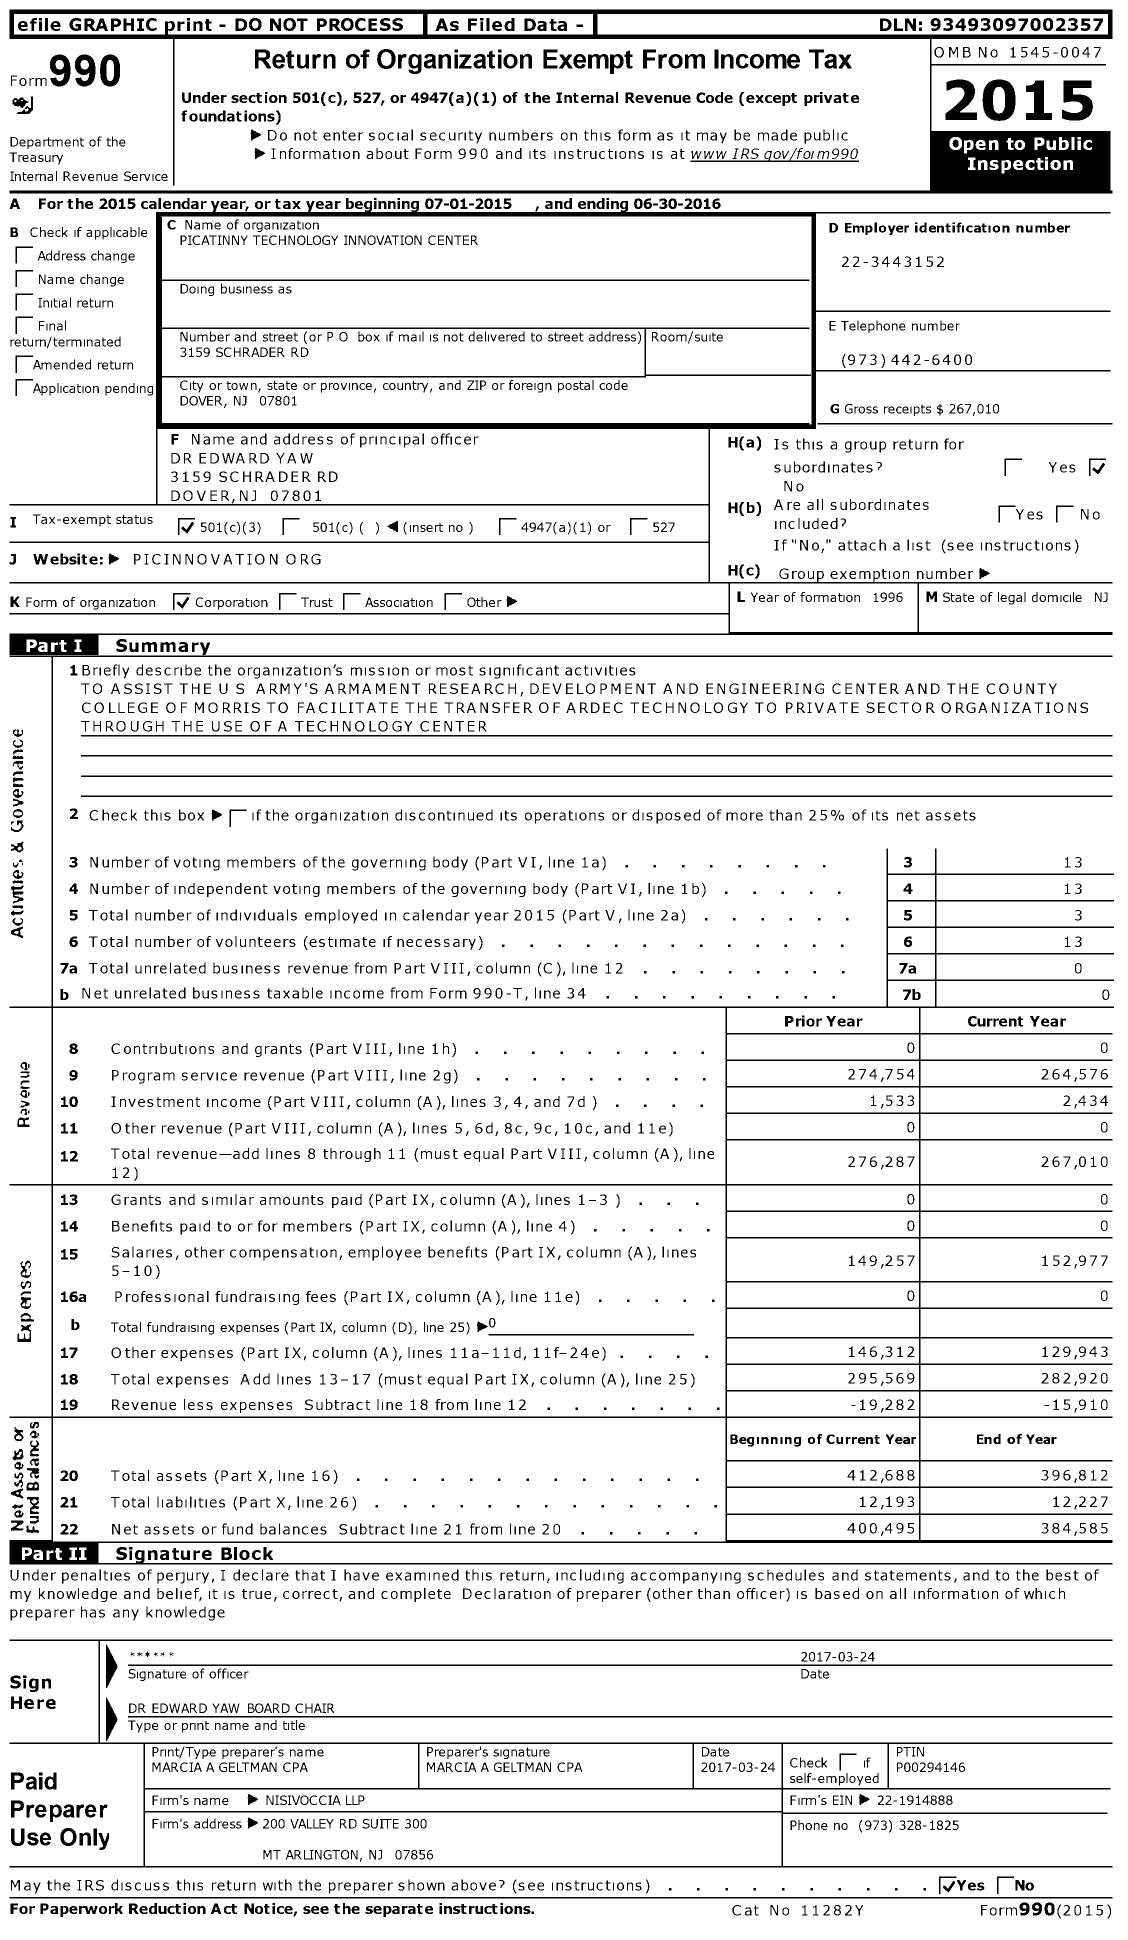 Image of first page of 2015 Form 990 for Picatinny Technology Innovation Center